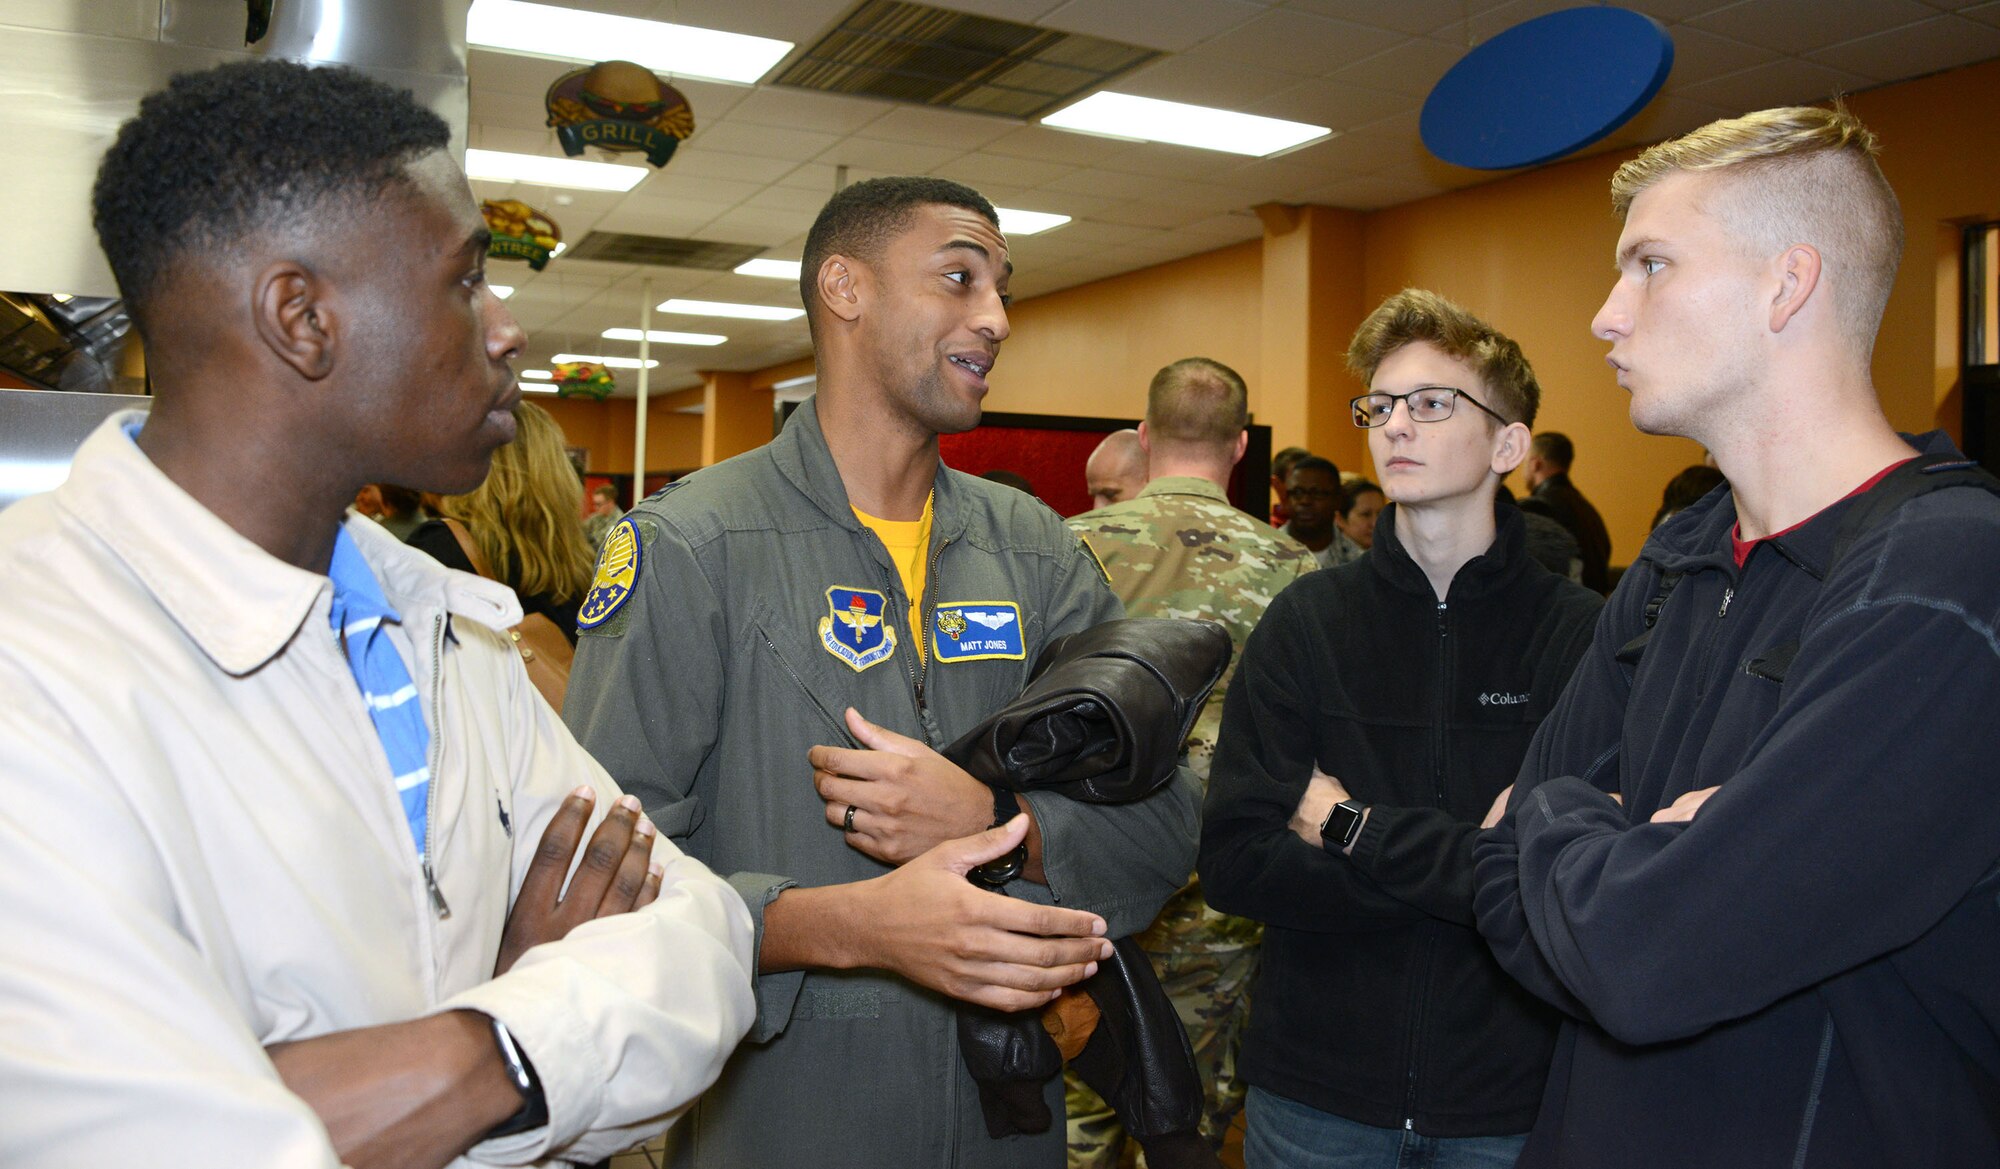 An Air Force mentor talks to students during the Aim High Outreach event at Maxwell Air Force Base, Alabama. Aim High is an Air Force Recruiting Service Detachment 1 sponsored event.